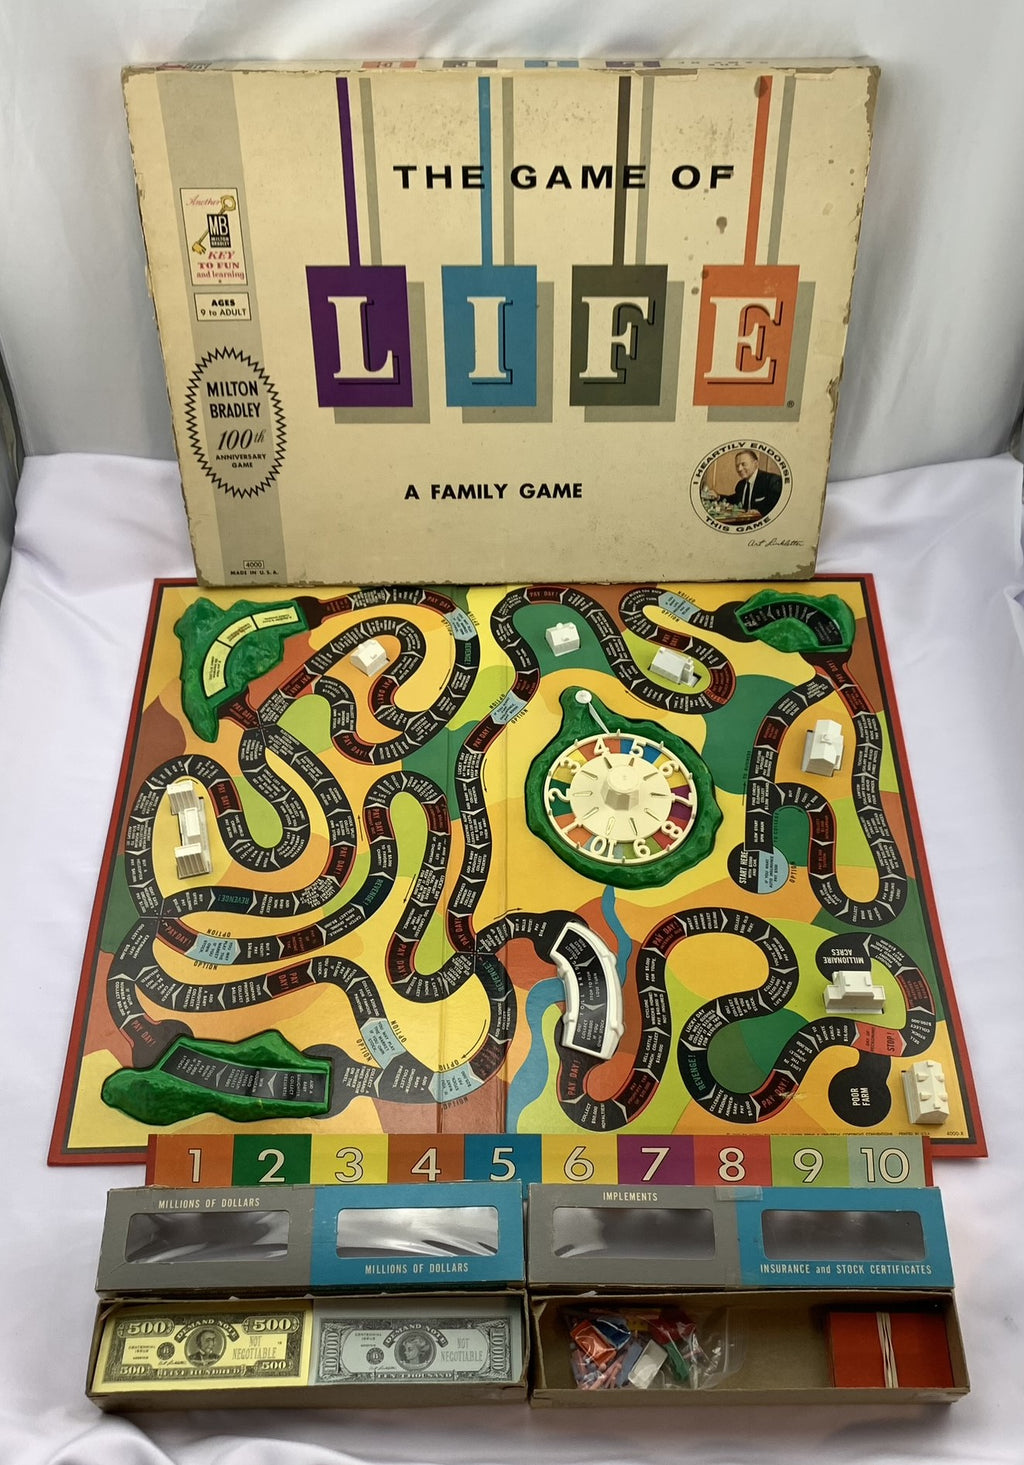 Game of Life - 1960 Reproduction